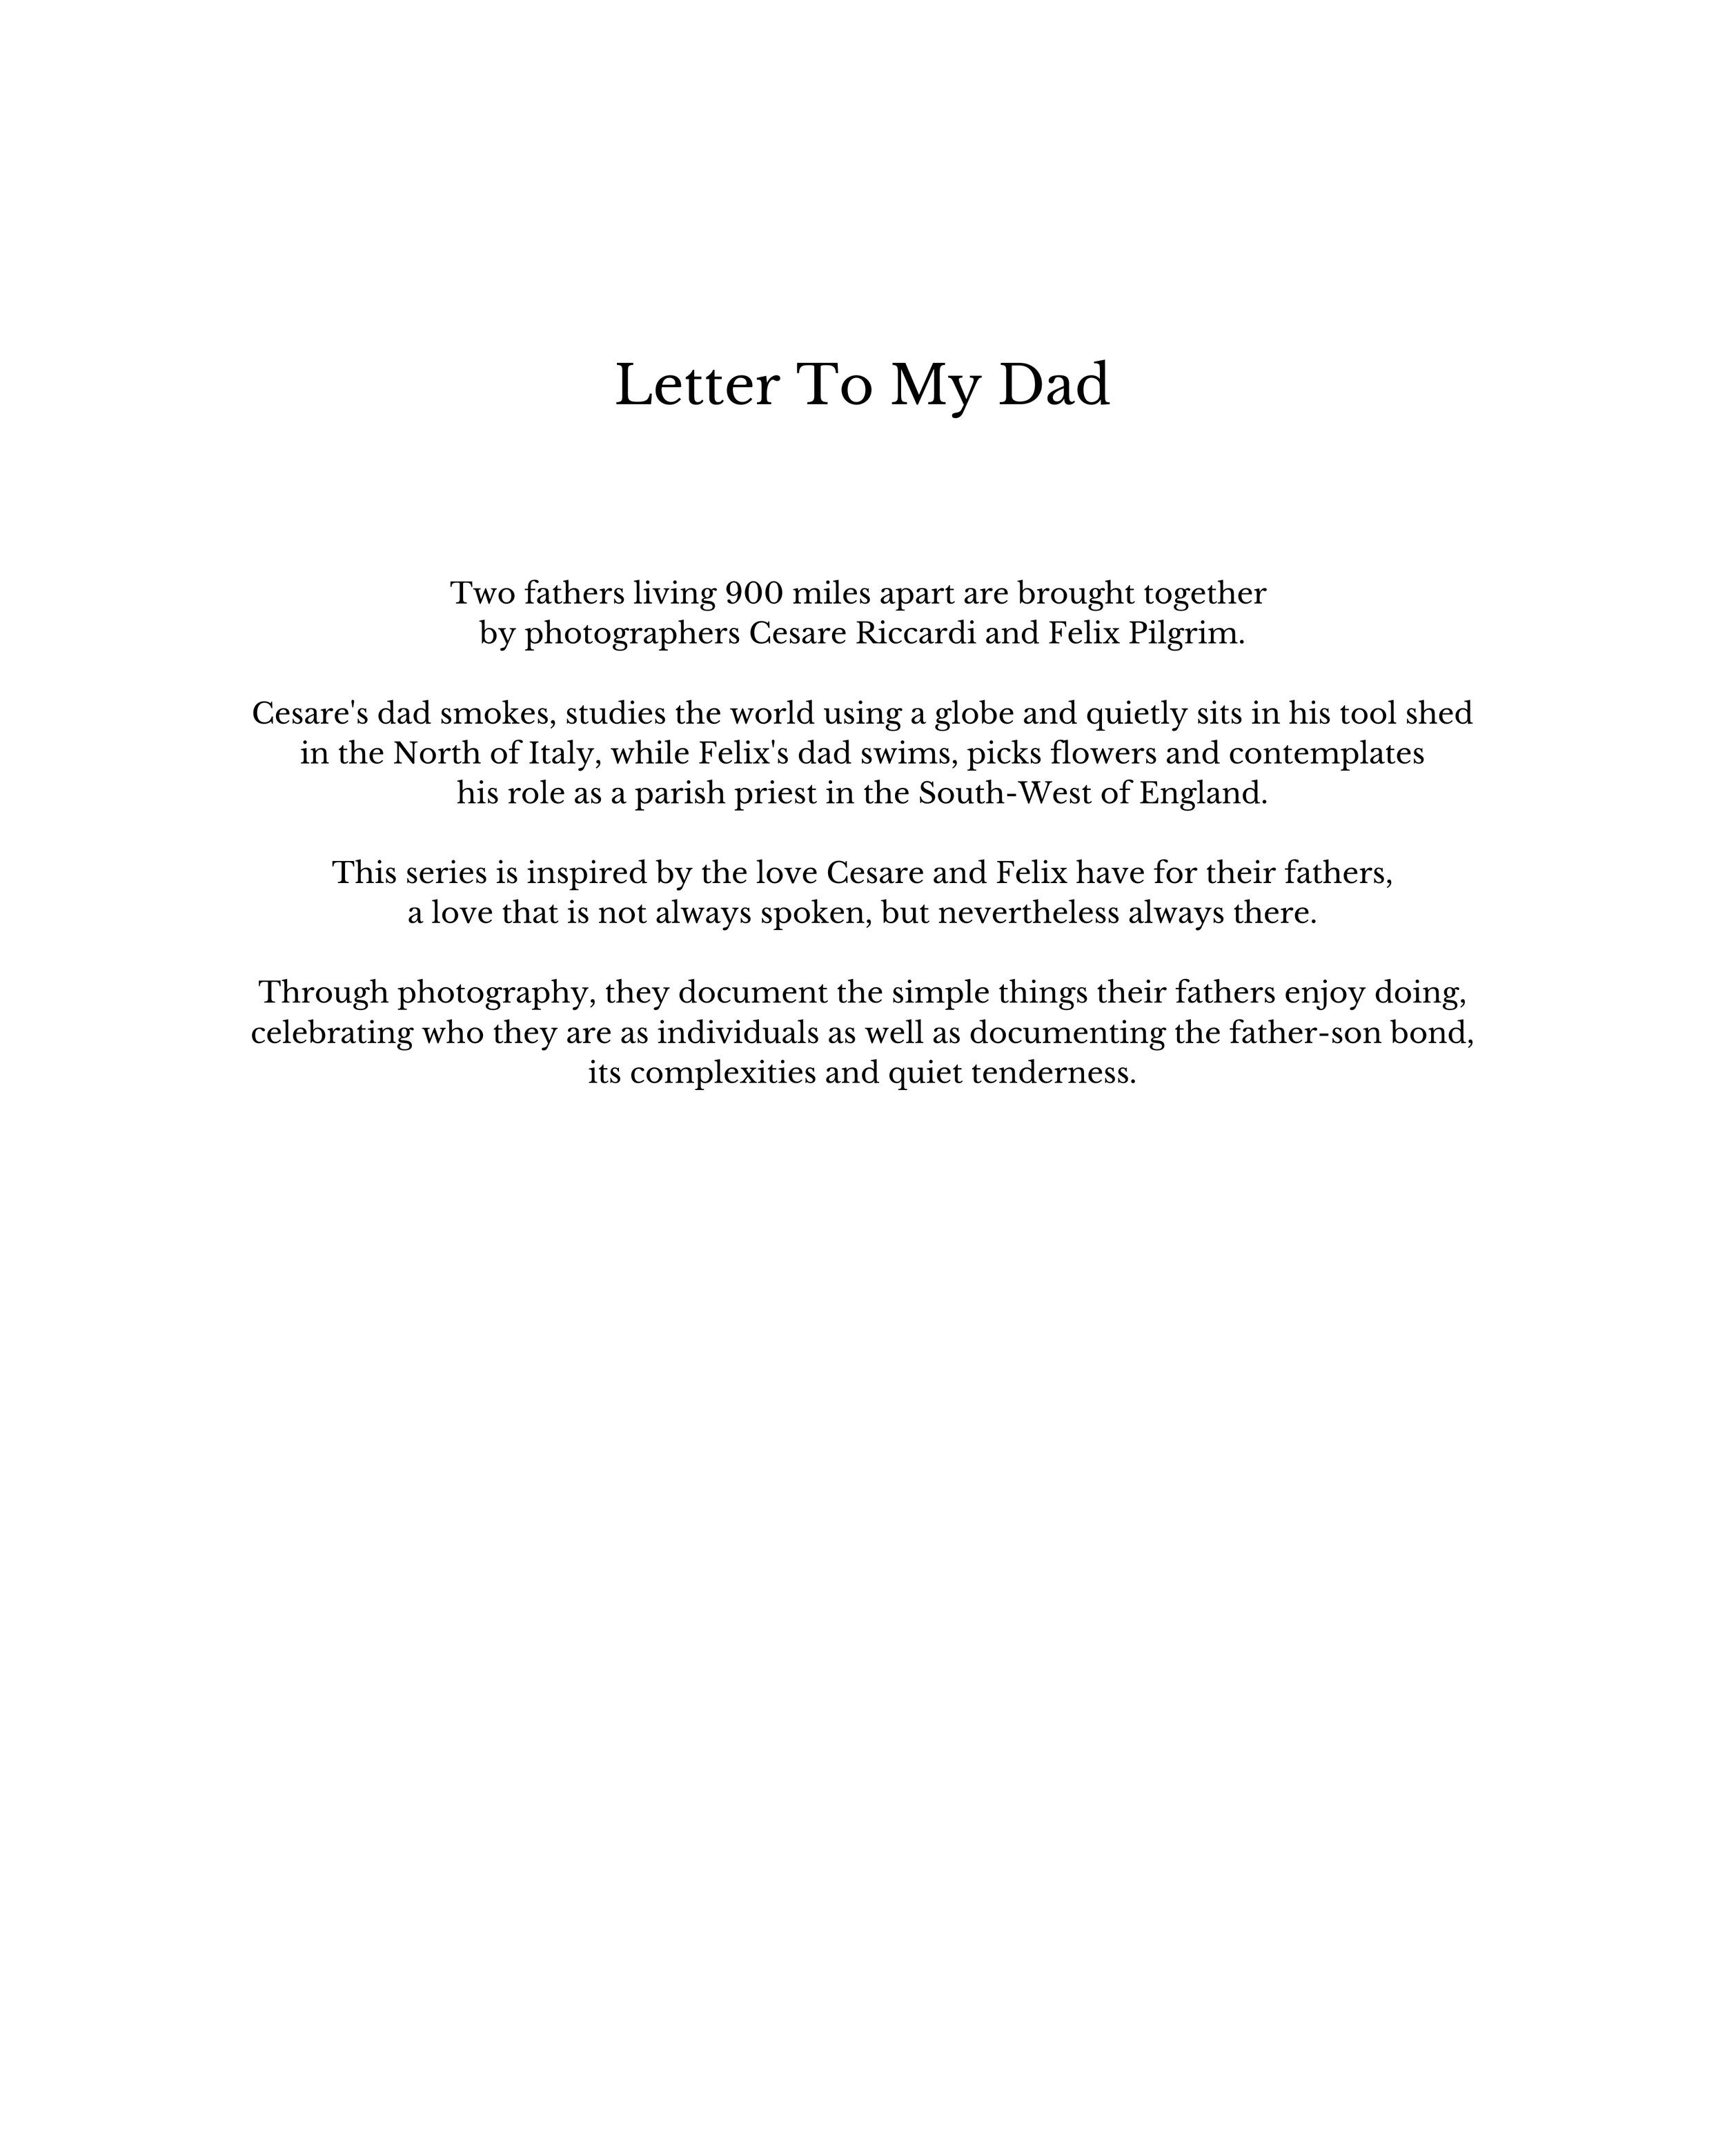 Letter To My Dad.jpg